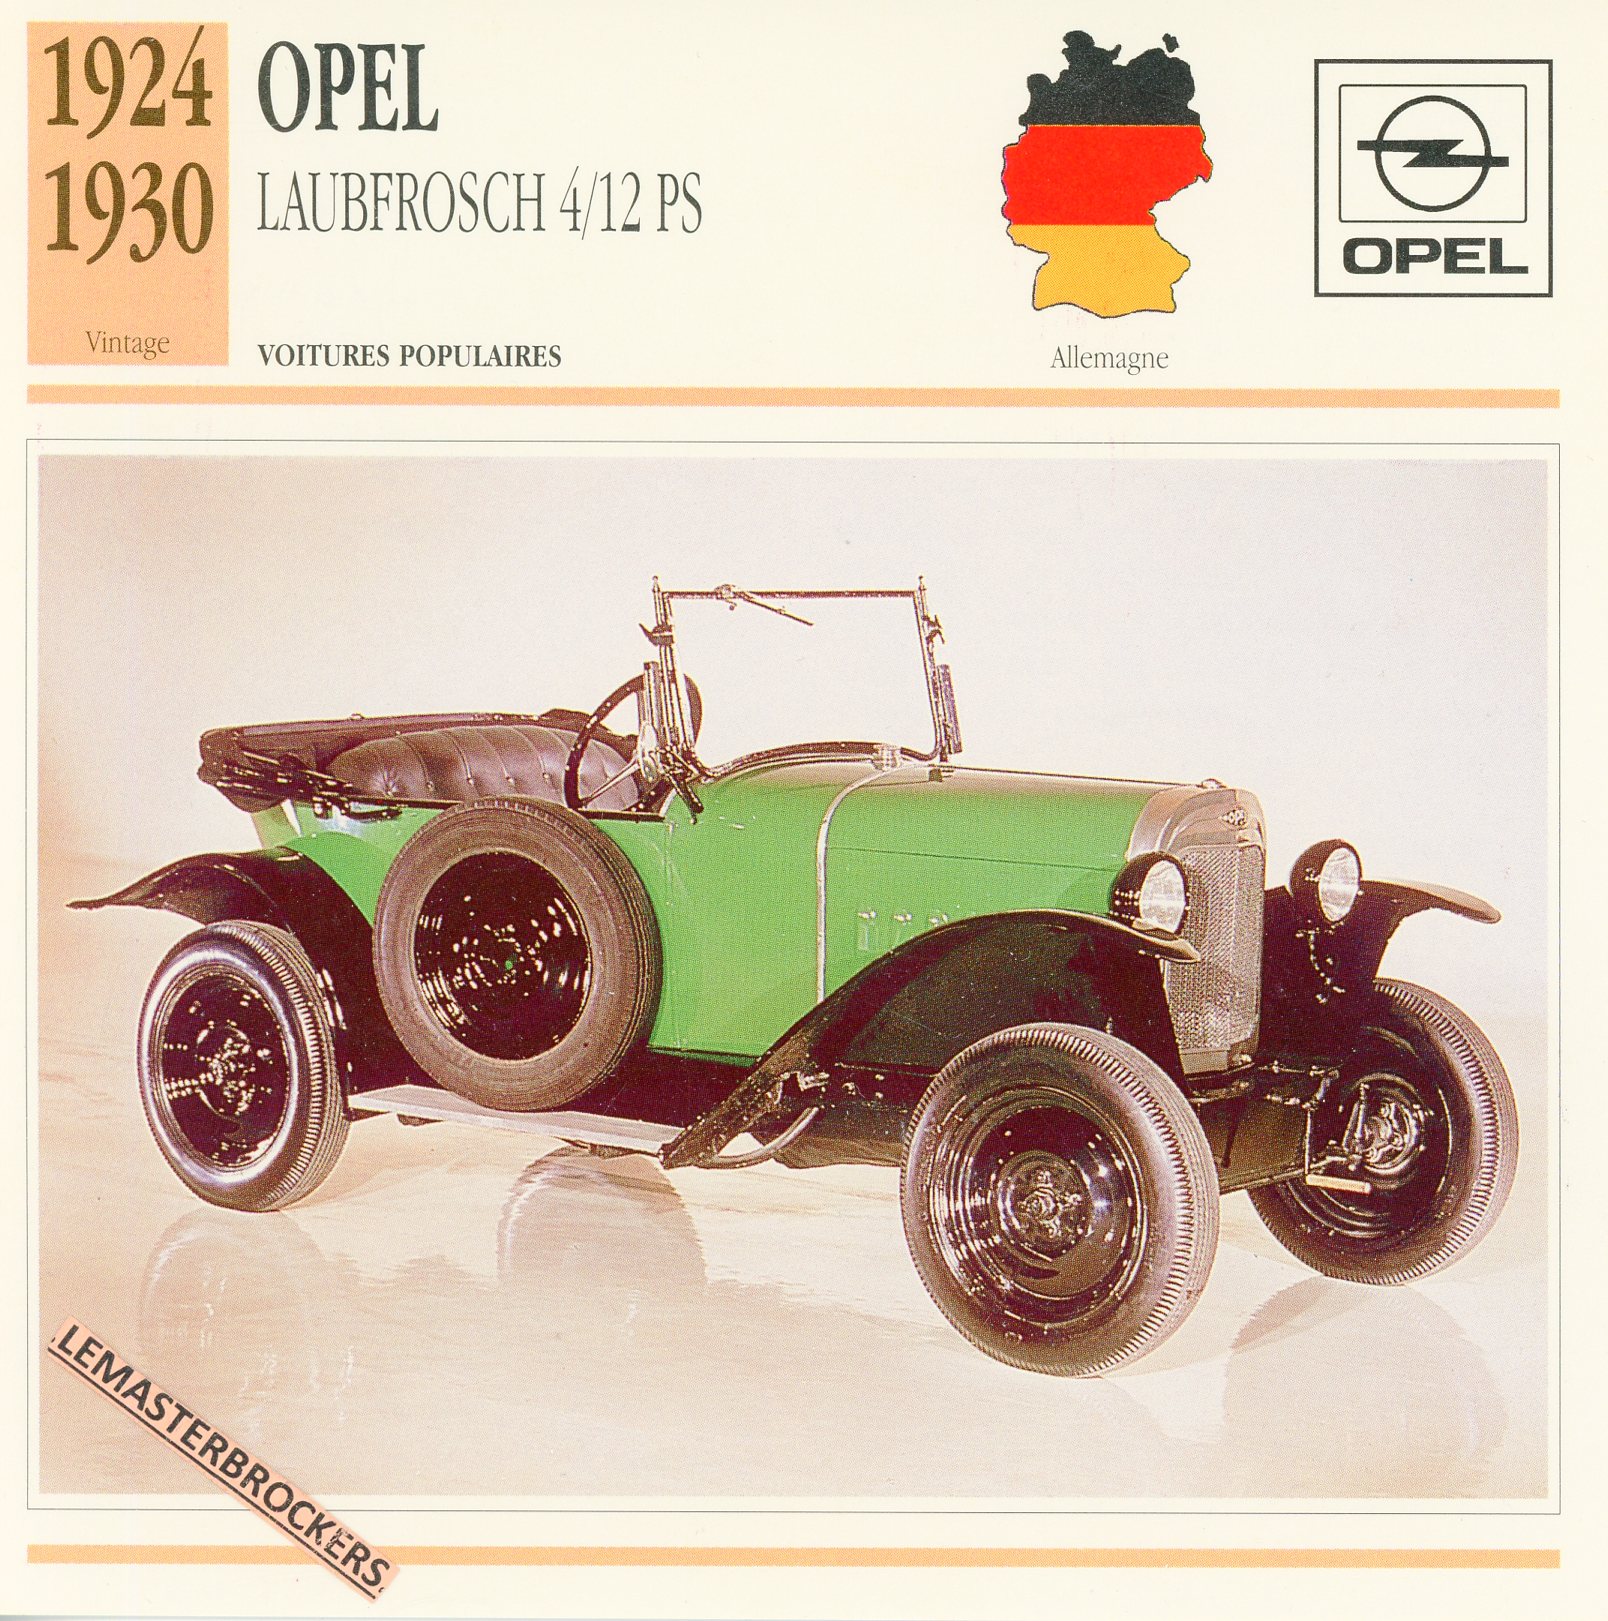 FICHE-OPEL-LAUBFROSCH-412-PS-LEMASTERBROCKERS-FICHE-AUTO-CARS-CARD-ATLAS-FRENCH